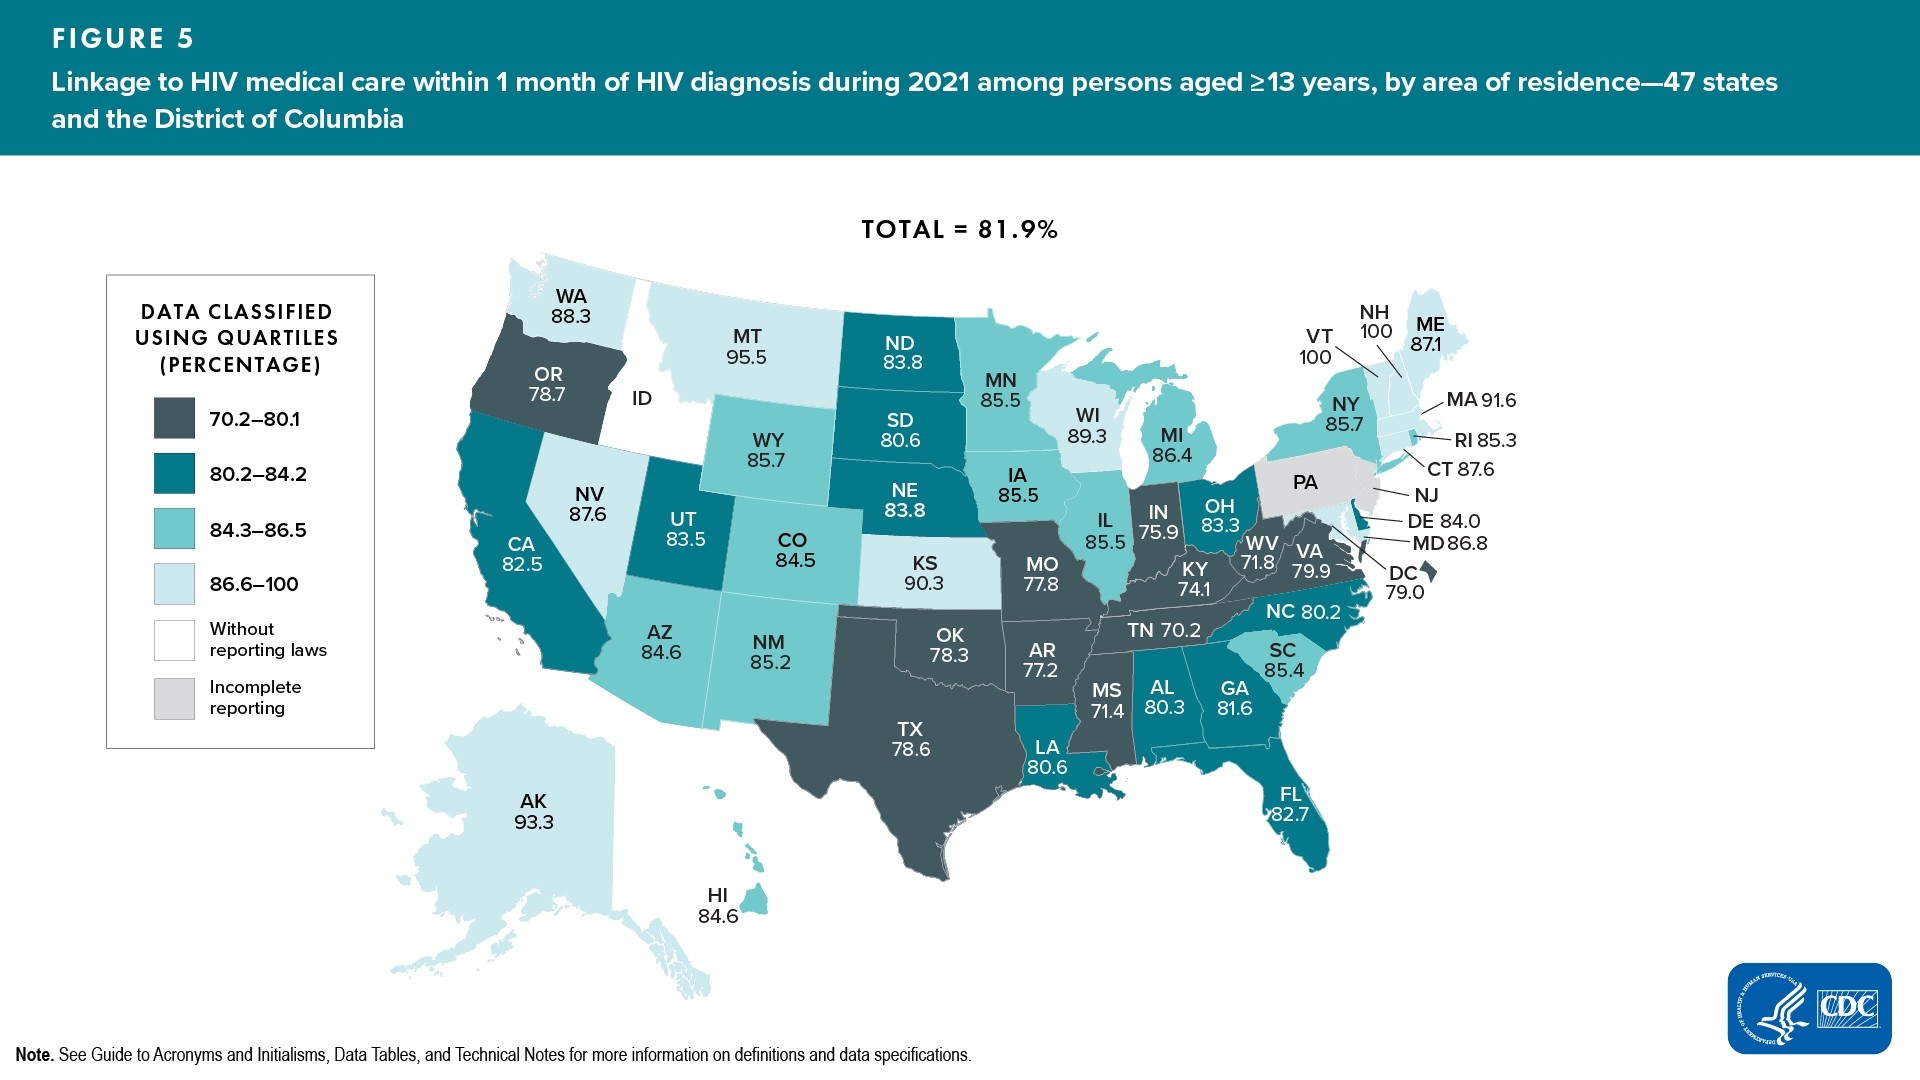 Figure 5. Linkage to HIV medical care within 1 month of HIV diagnosis during 2021 among persons aged ≥13 years, by area of residence — 47 states and the District of Columbia